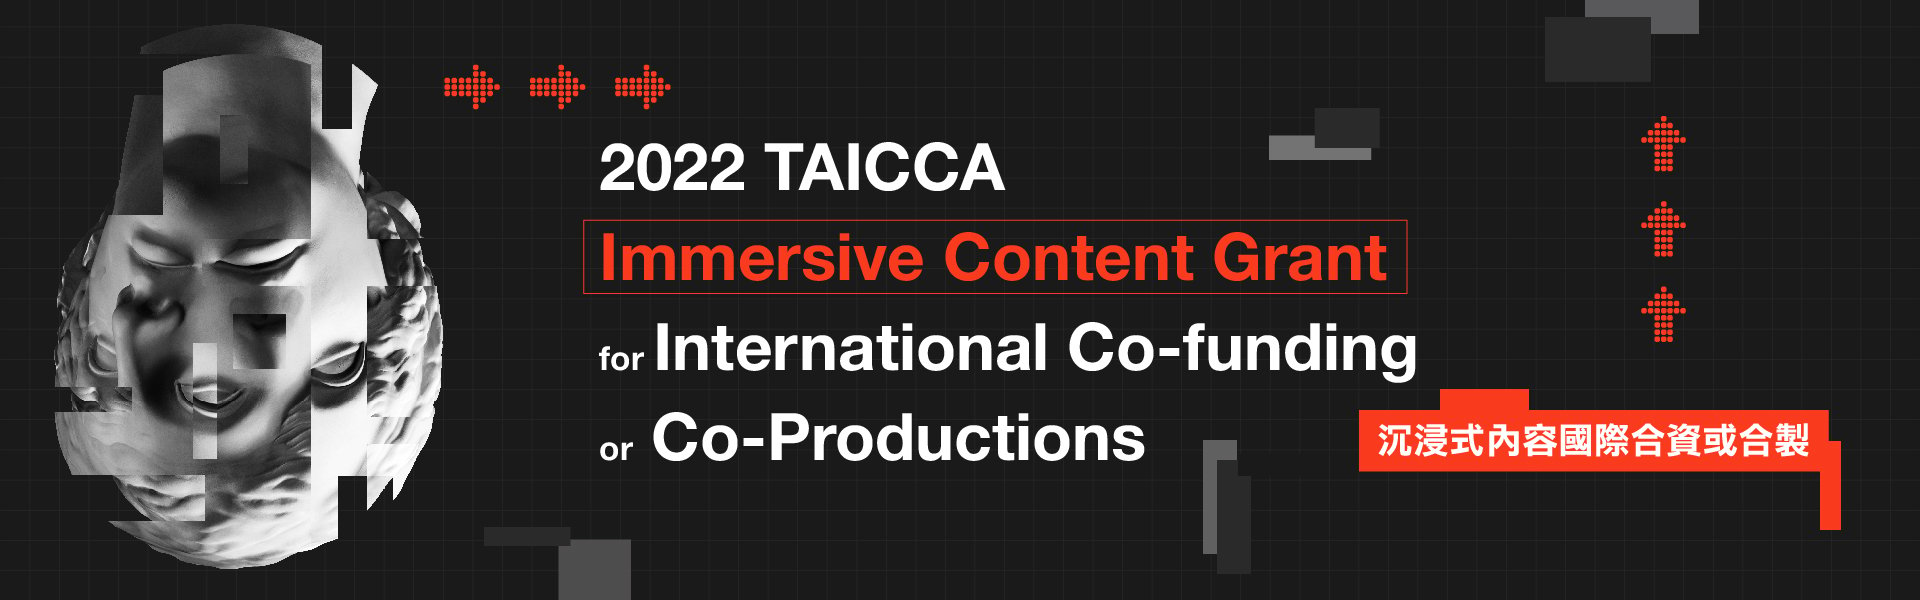 2022 TAICCA Immersive Content Grant for International Co-funding or Co-Productions